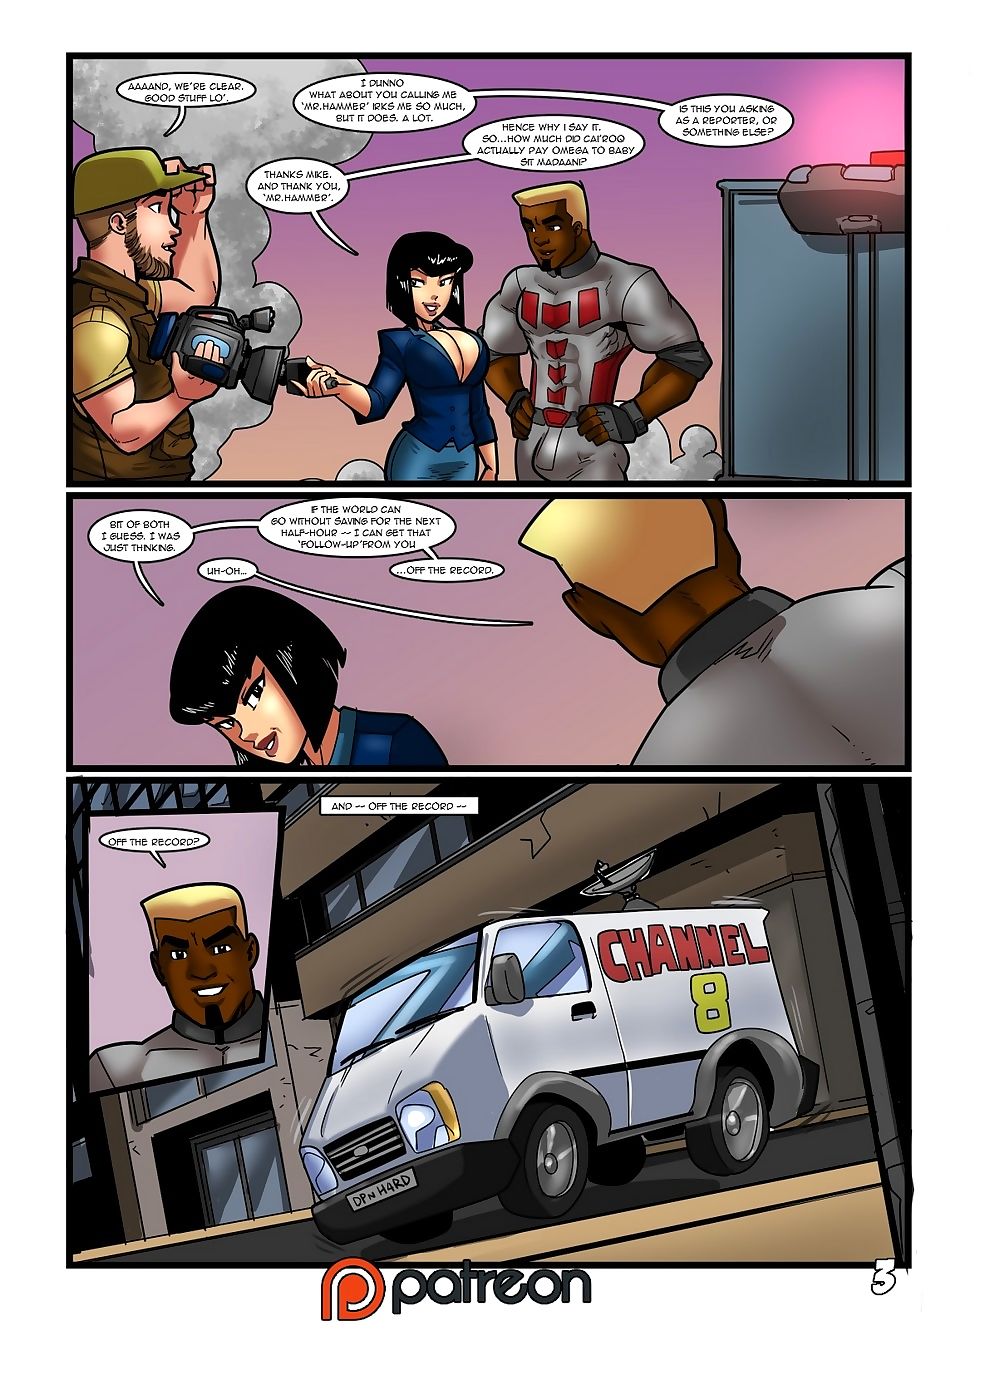 Hero Tales #1- Legs to Kill page 1